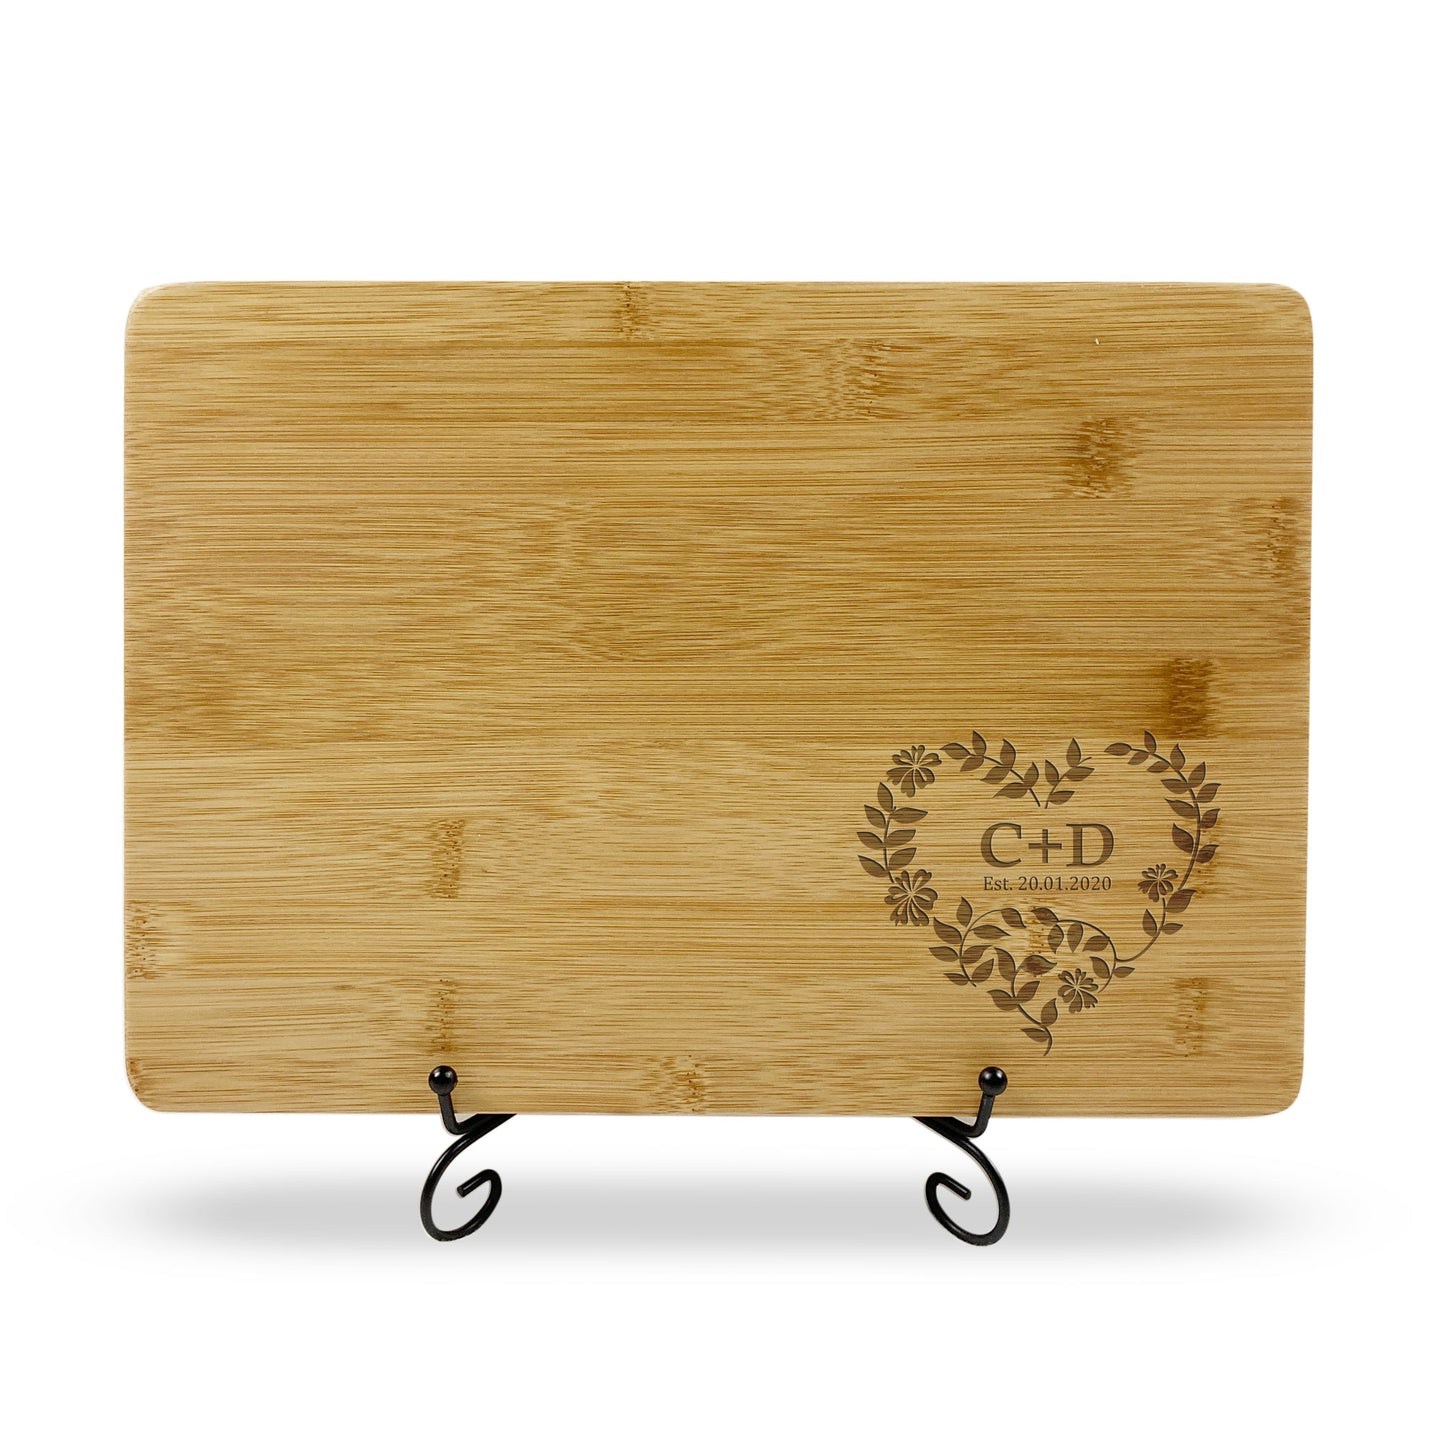 Floral Heart with Initials & Date Chopping Board Gift